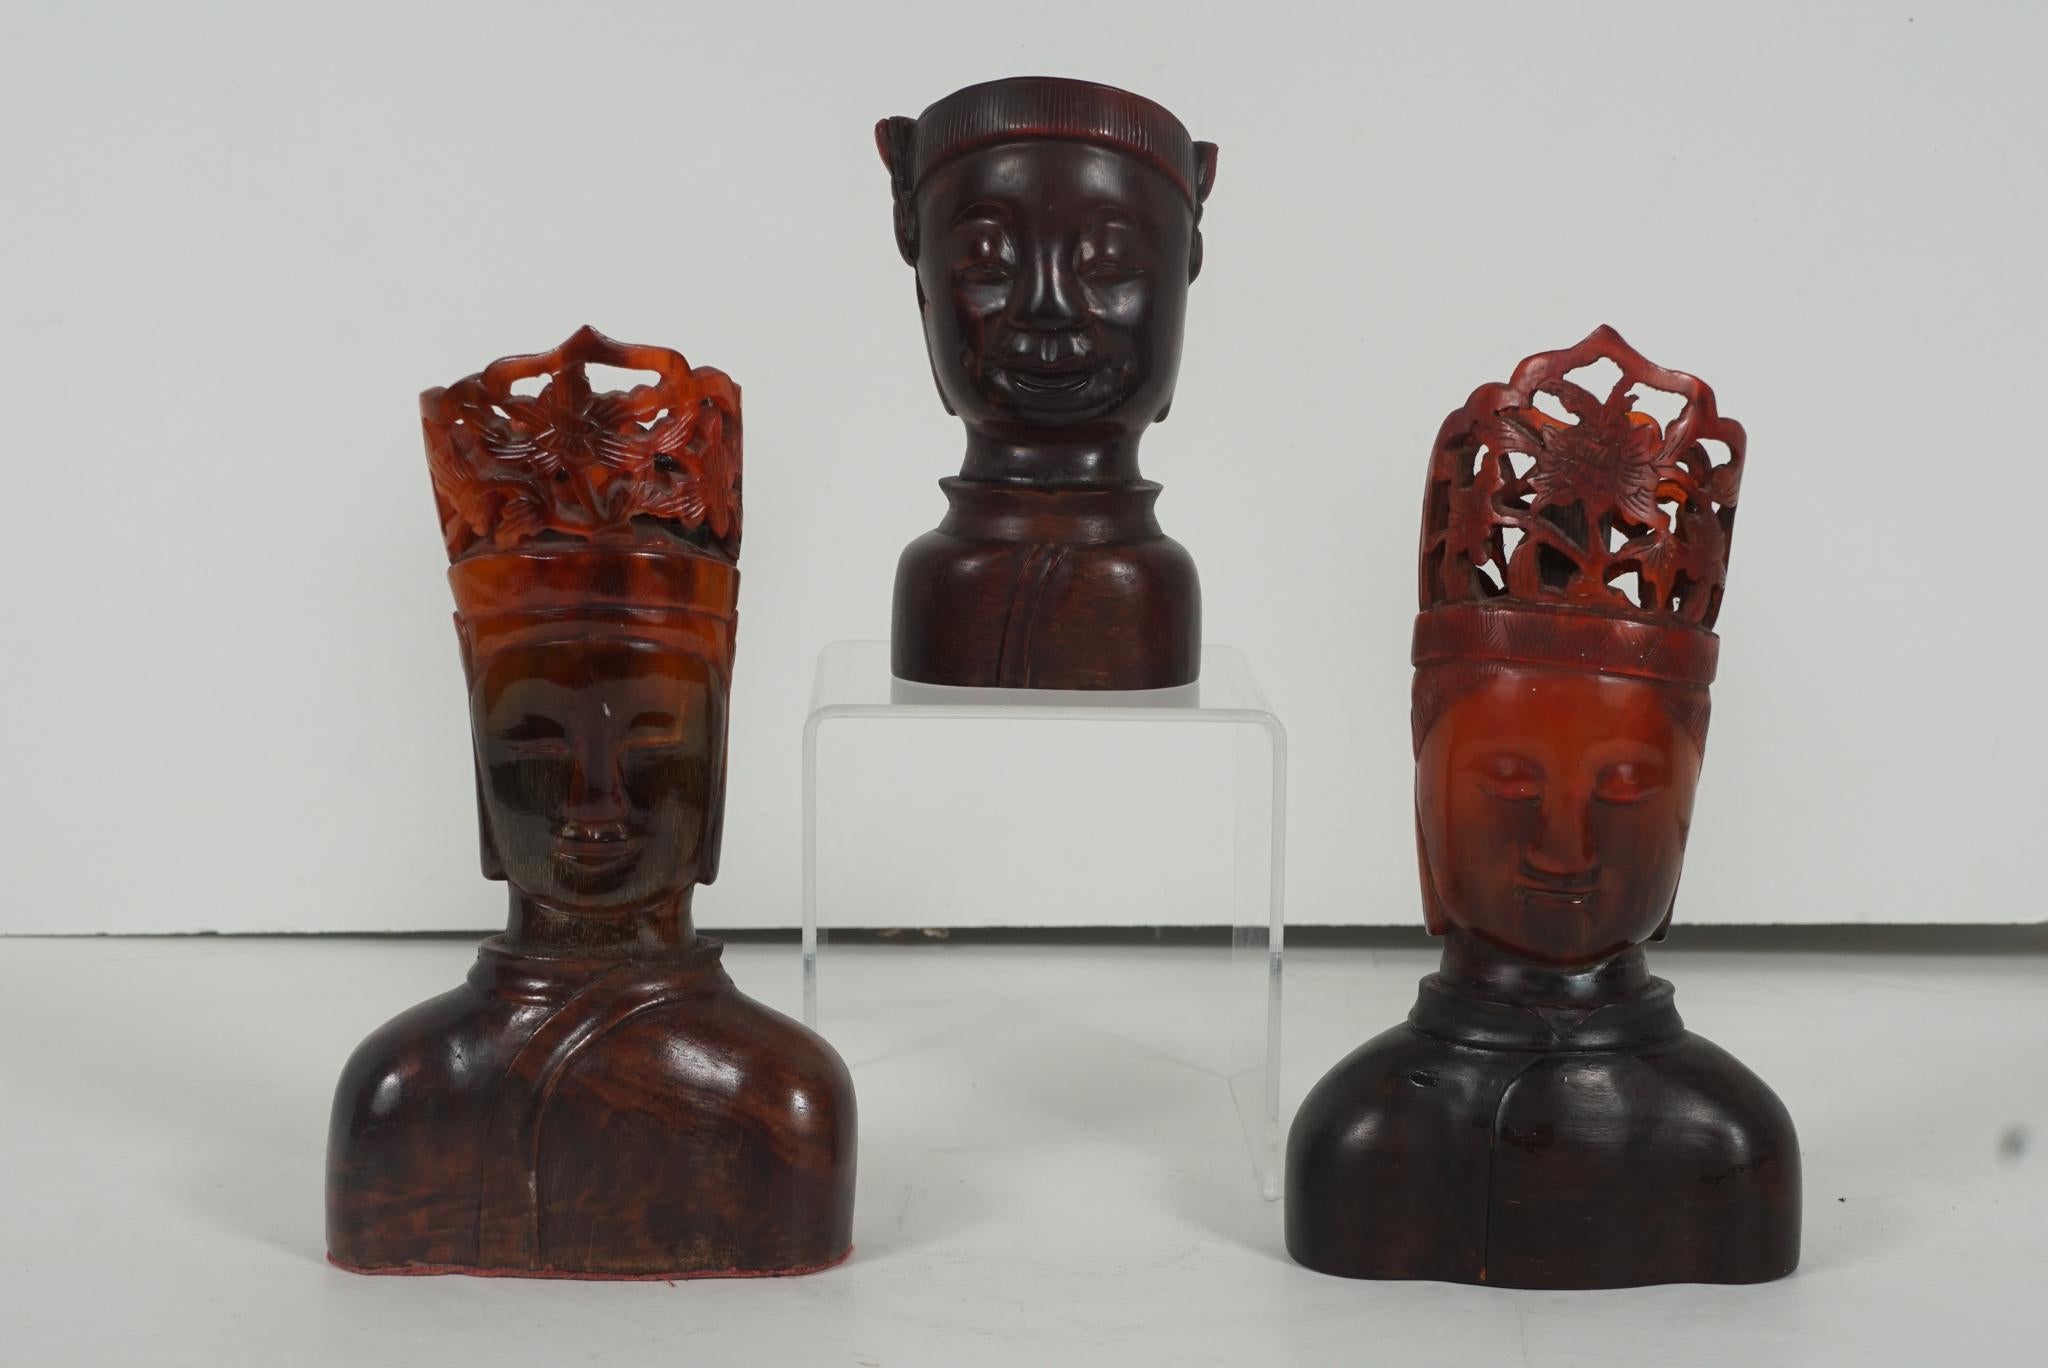 Three early 20th century red horn carvings of Buddha and Bodhisattvas. These three carvings all from approx. circa 1915 represent the bodhisattvas and or the Buddha. Carved from Ox horn with a deep red color the busts are then mounted on rosewood